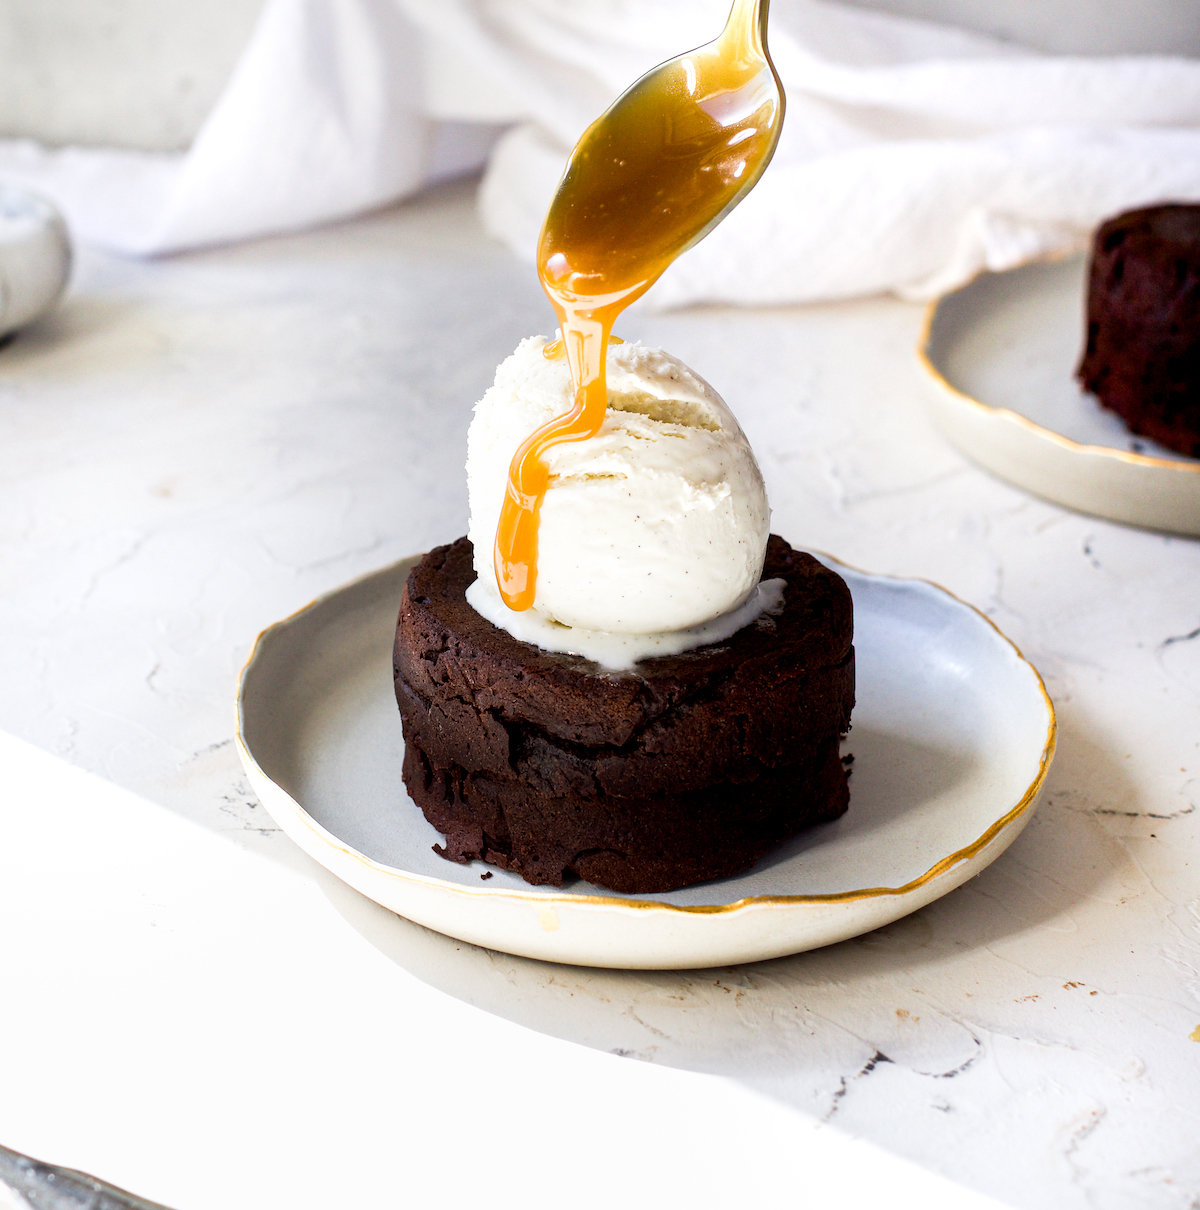 A spoon drizzling caramel onto ice cream on top of a little chocolate cake.